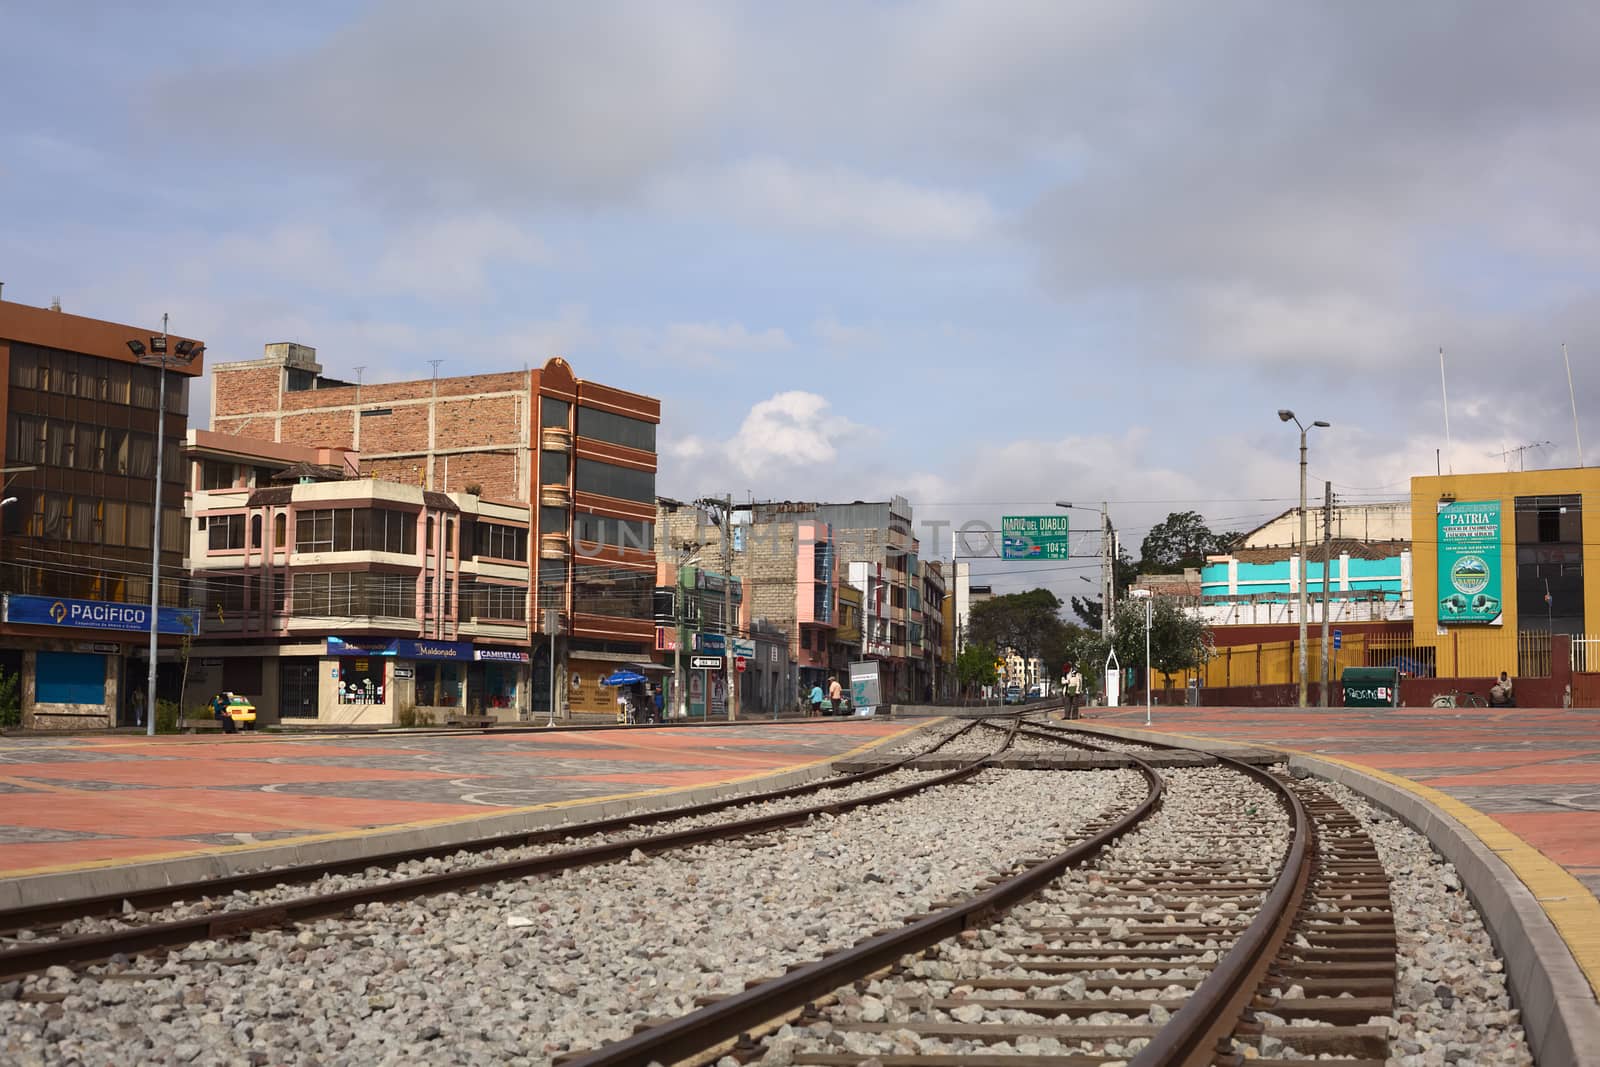 RIOBAMBA, ECUADOR - FEBRUARY 16, 2014: Rails leading out of the train station of Riobamba in the direction of the famous Nariz del Diablo (Devil's Nose) on February 16, 2014 in Riobamba, Ecuador